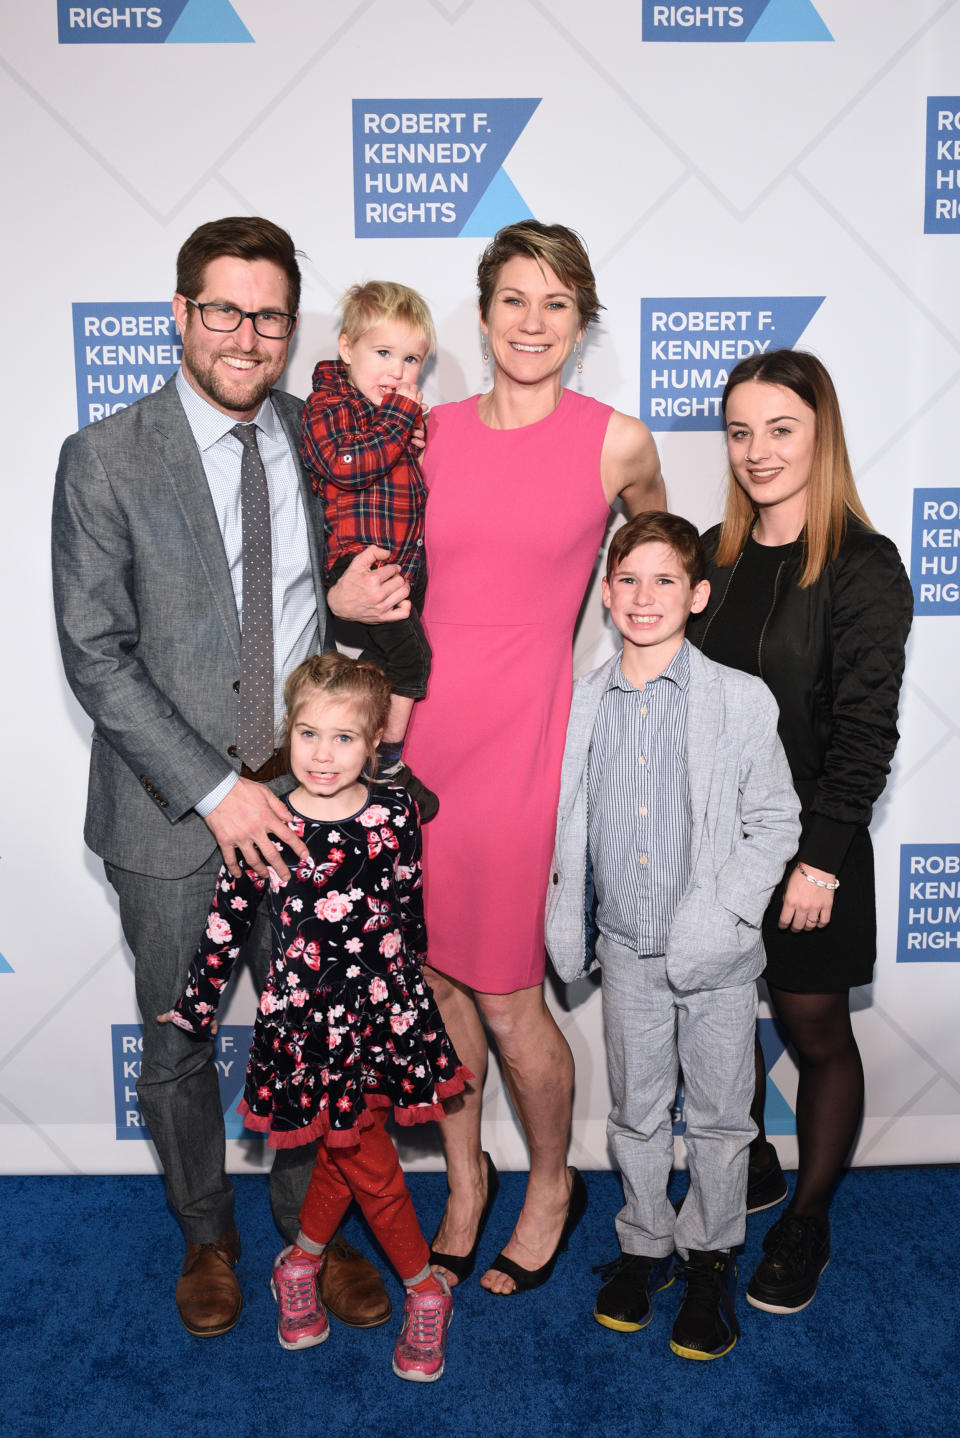 David McKean, Maeve Kennedy Townsend Mckean and family attend the Robert F. Kennedy Human Rights Hosts 2019 Ripple Of Hope Gala & Auction (Mike Pont/Getty Images)